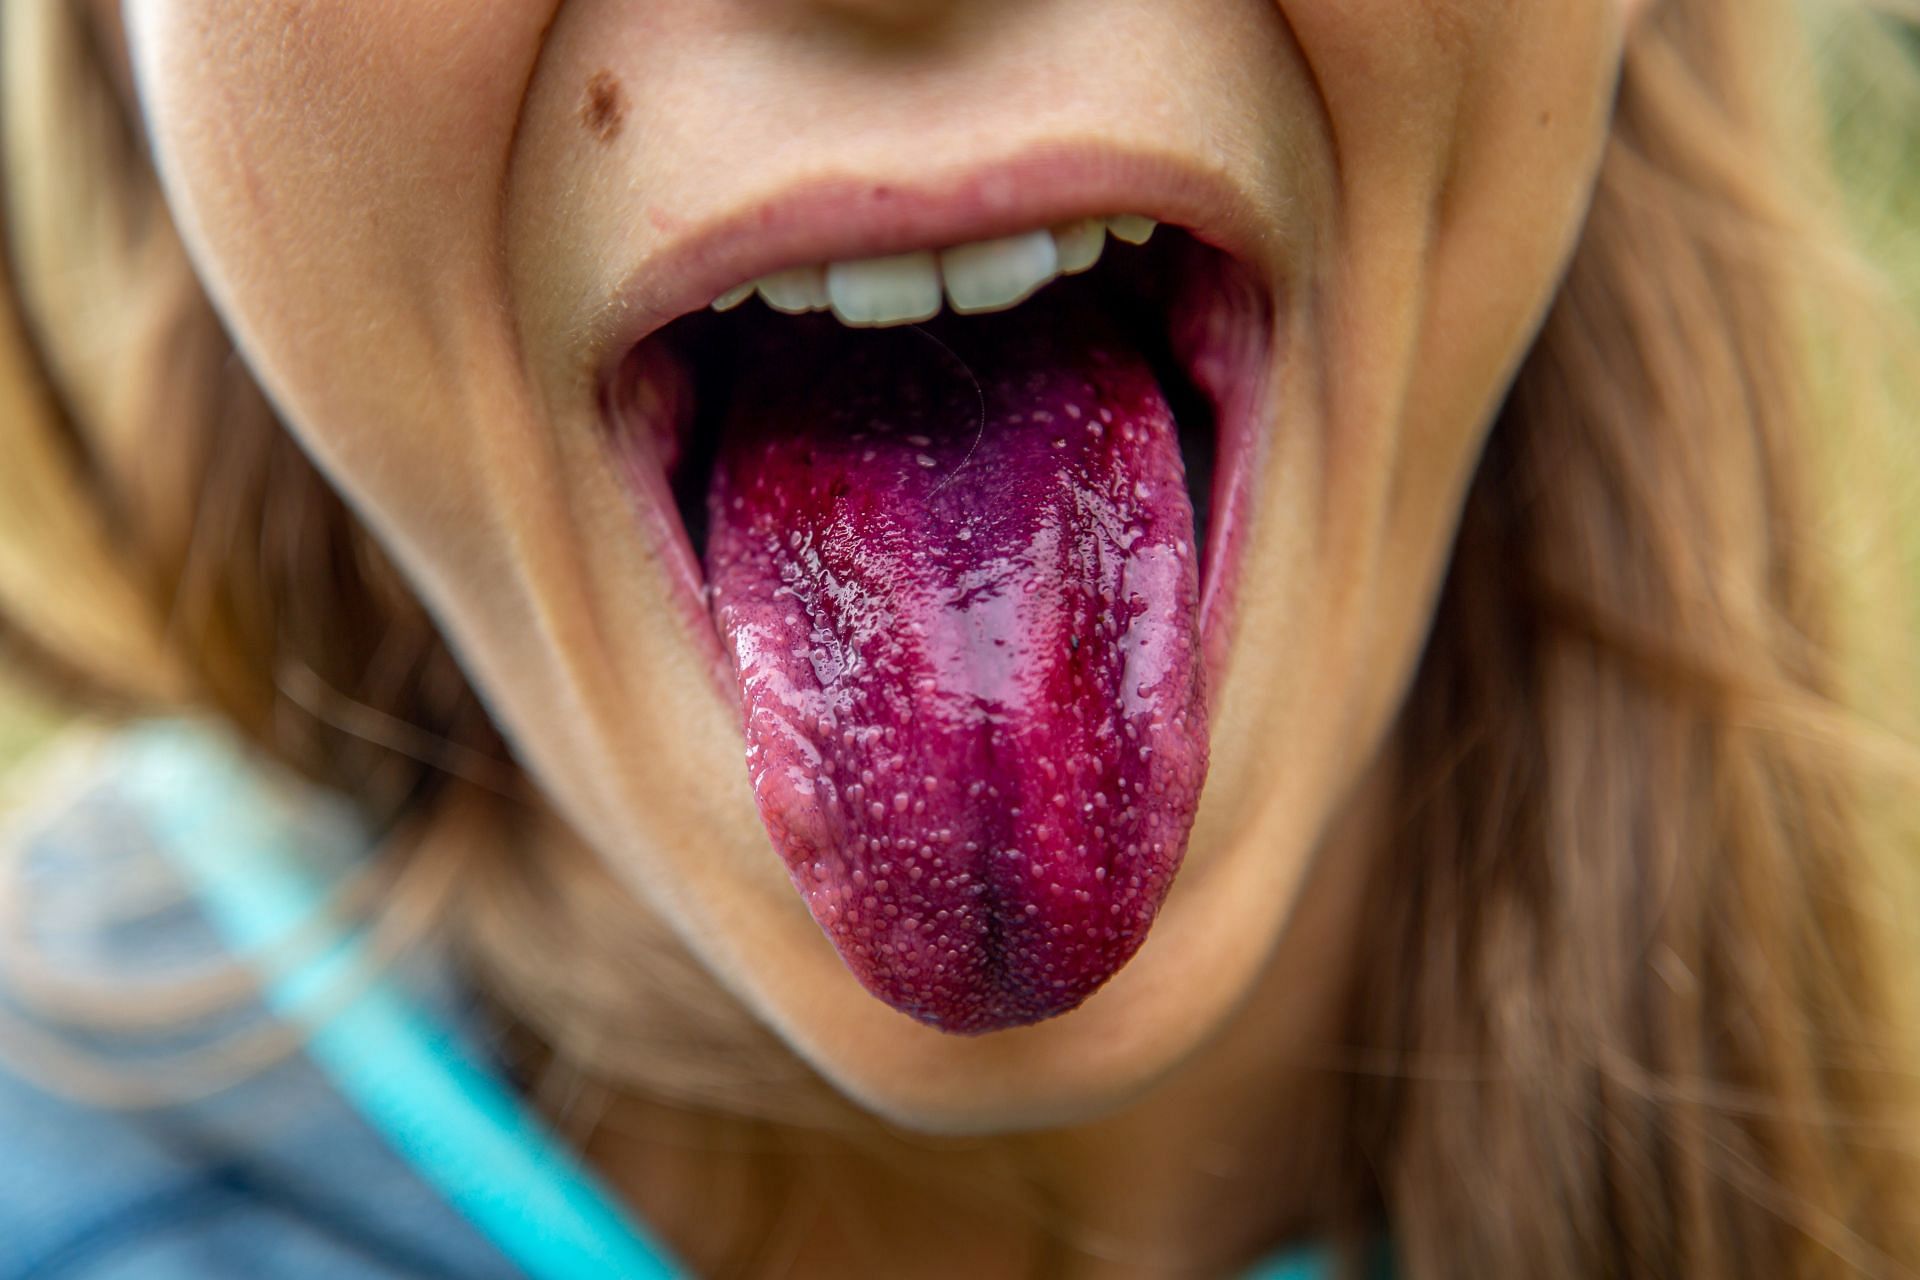 An inflamed tongue is one of the major signs of B6 deficiency. (Image via Unsplash/Alex Guillaume)